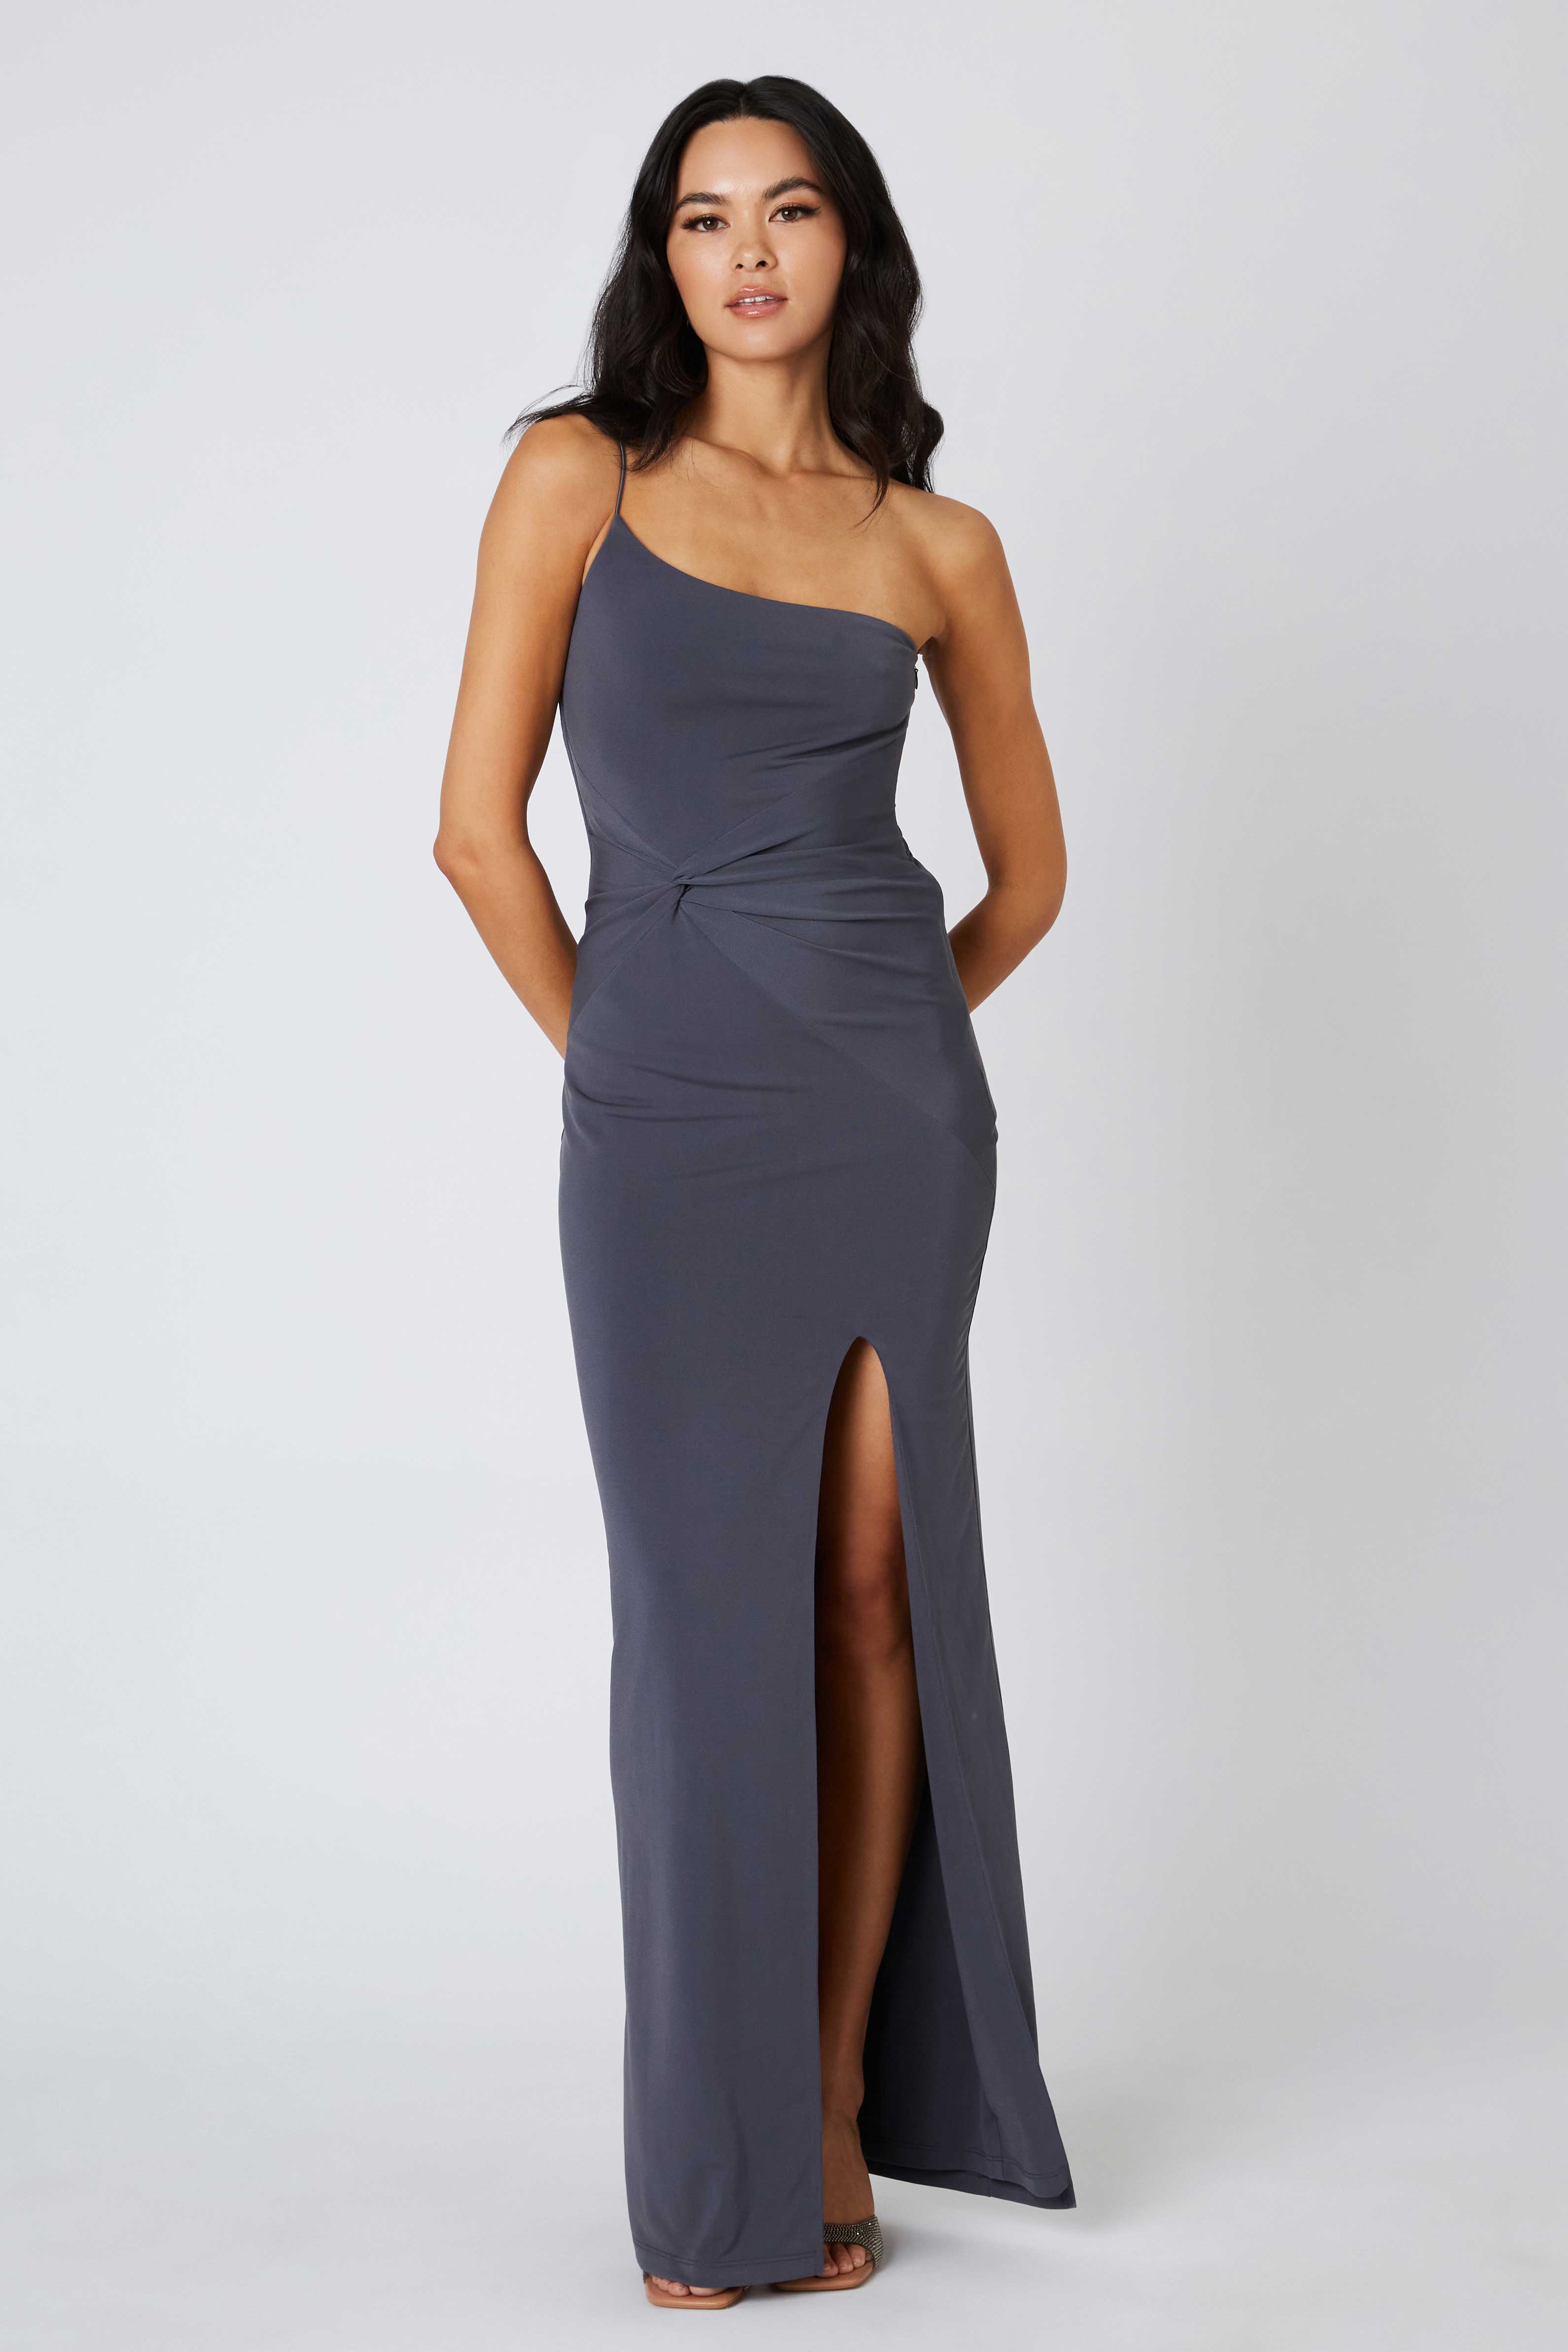 One Shoulder Bodycon Maxi Dress in Pewter Front View